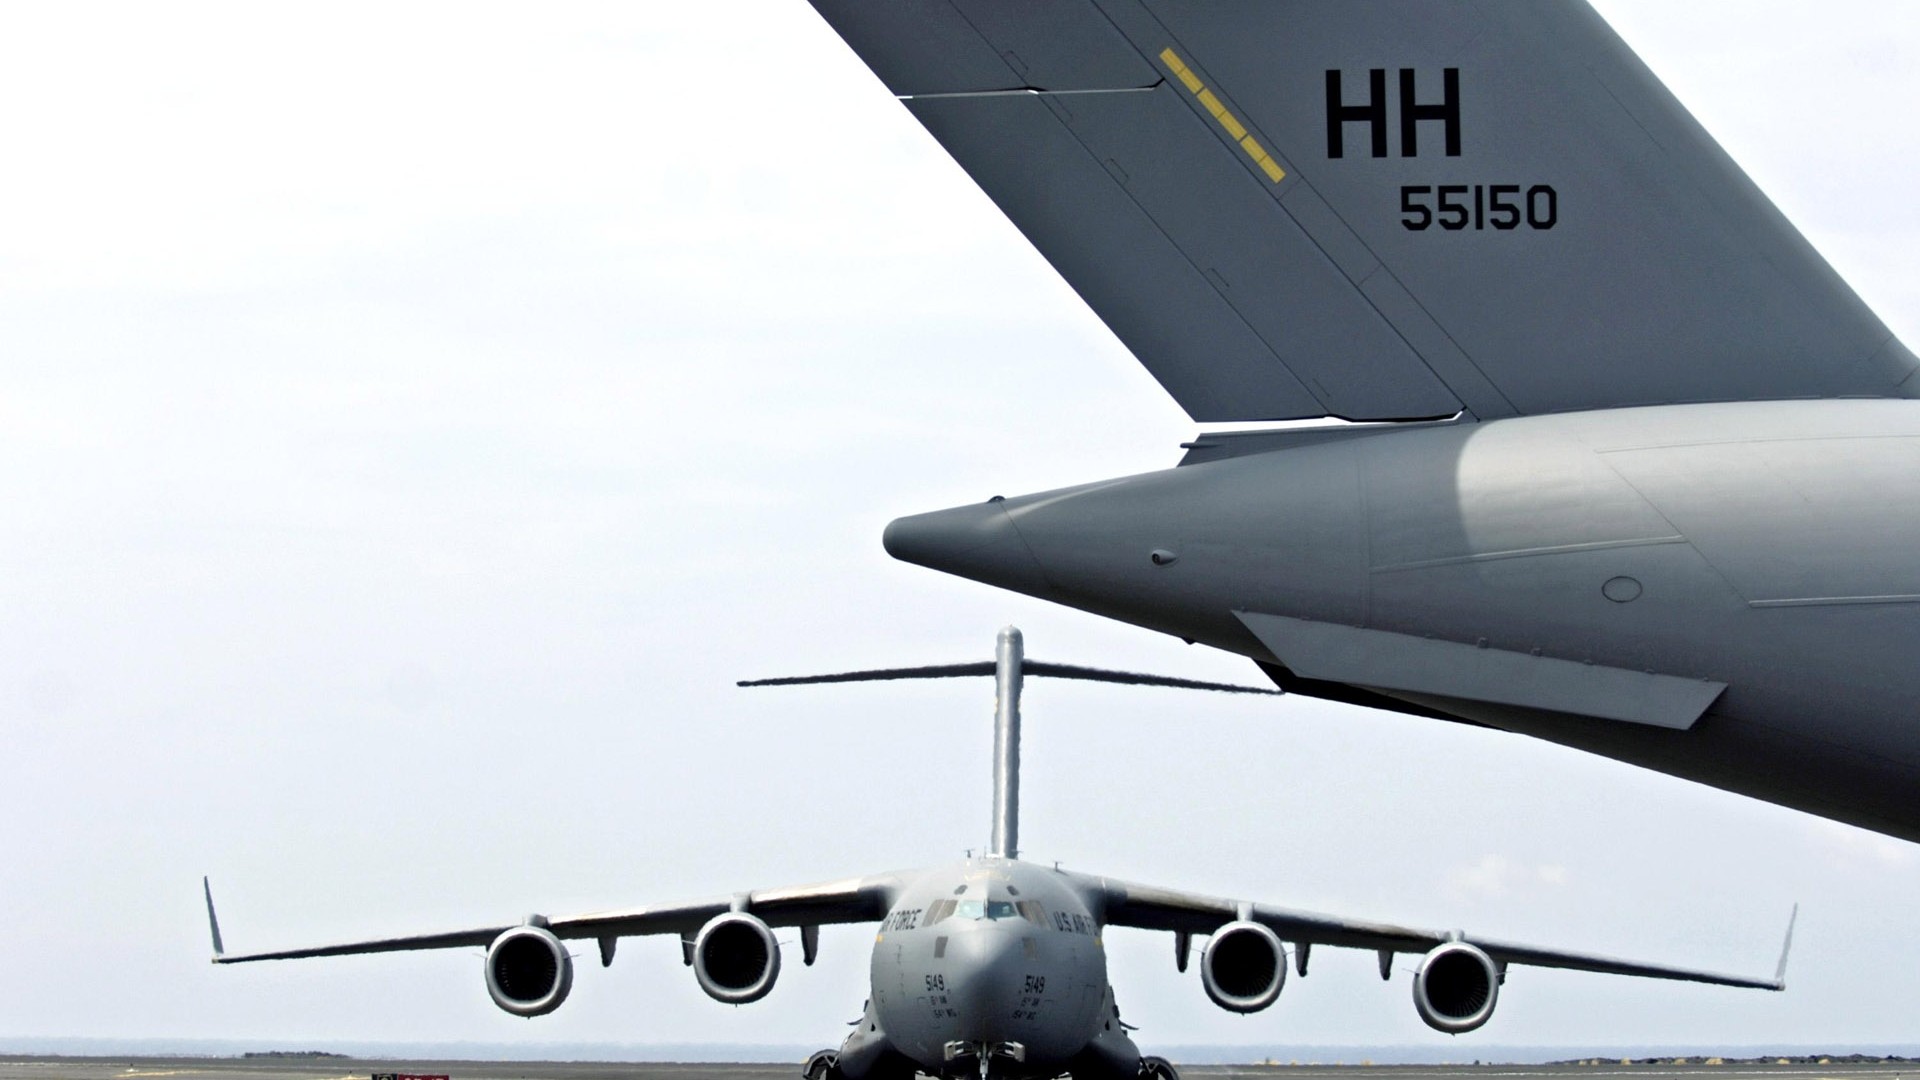 General 1920x1080 military aircraft airplane sky military aircraft Boeing C-17 Globemaster III US Air Force vehicle military vehicle